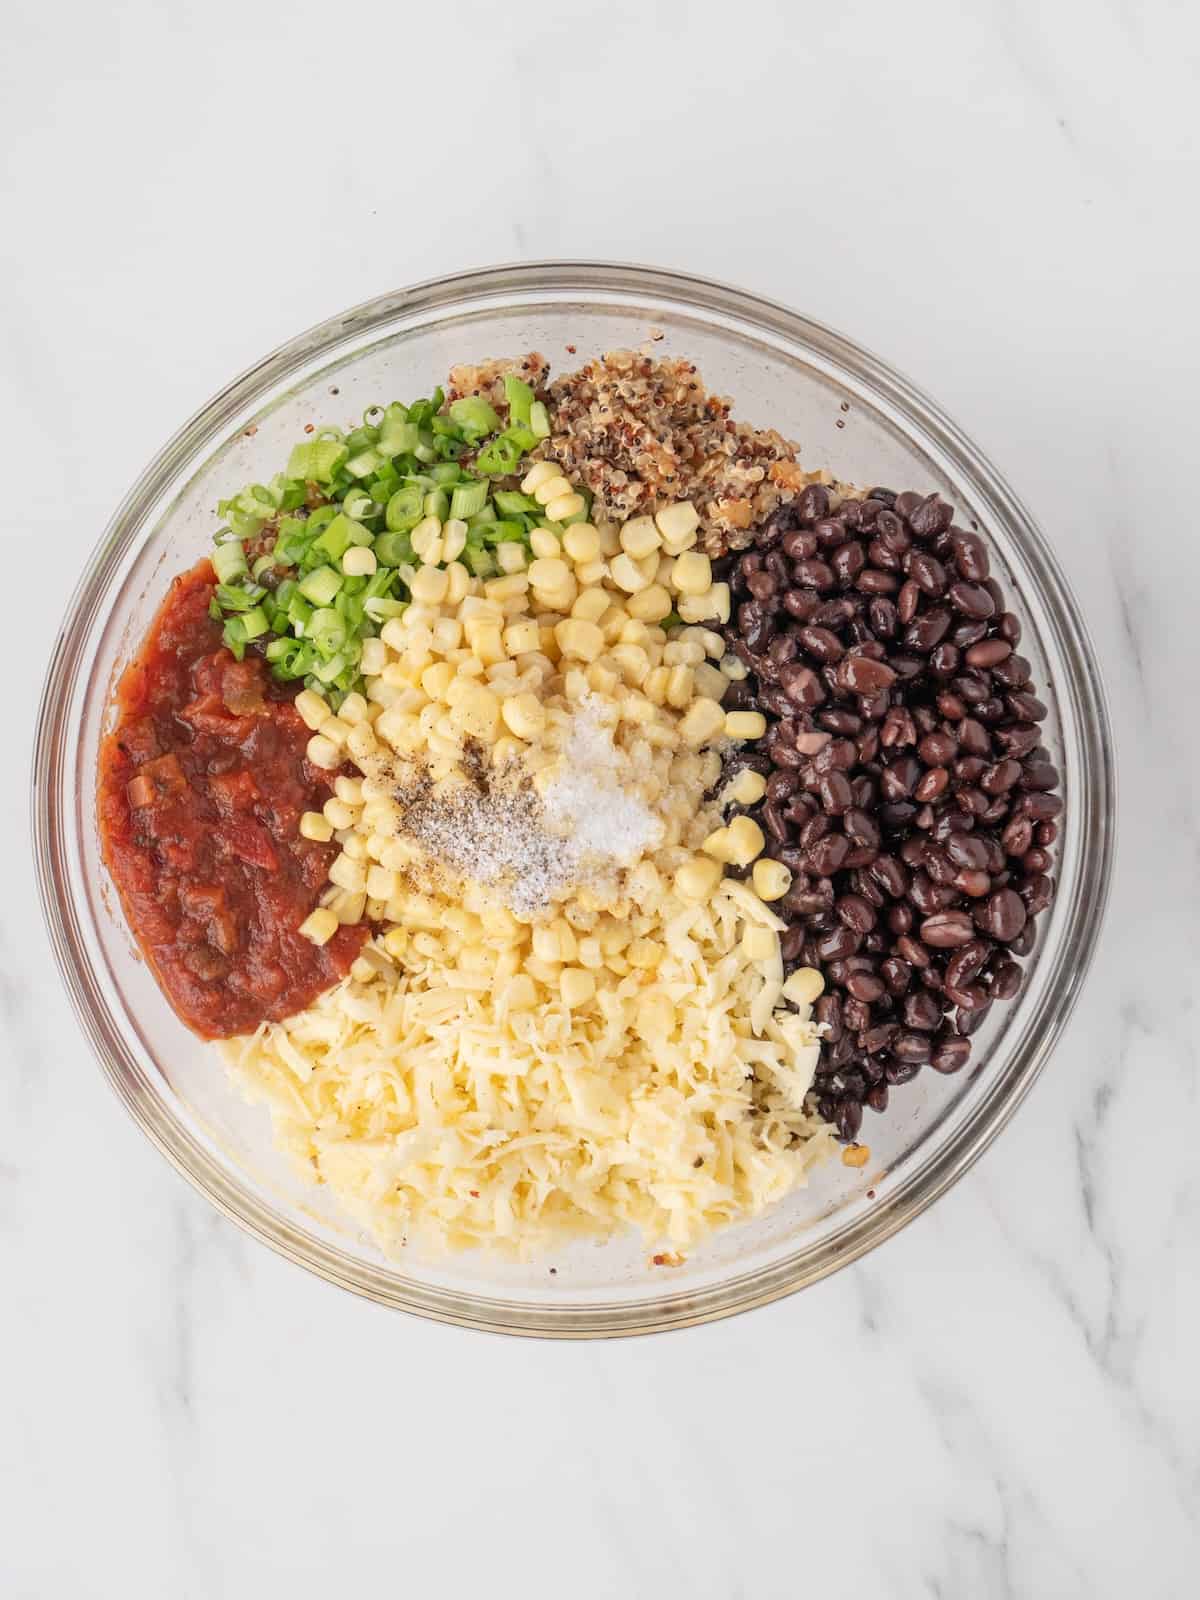 A large glass mixing bowl with corn, black beans, quinoa, shredded cheese, green onions and salsa, topped with salt and black pepper.